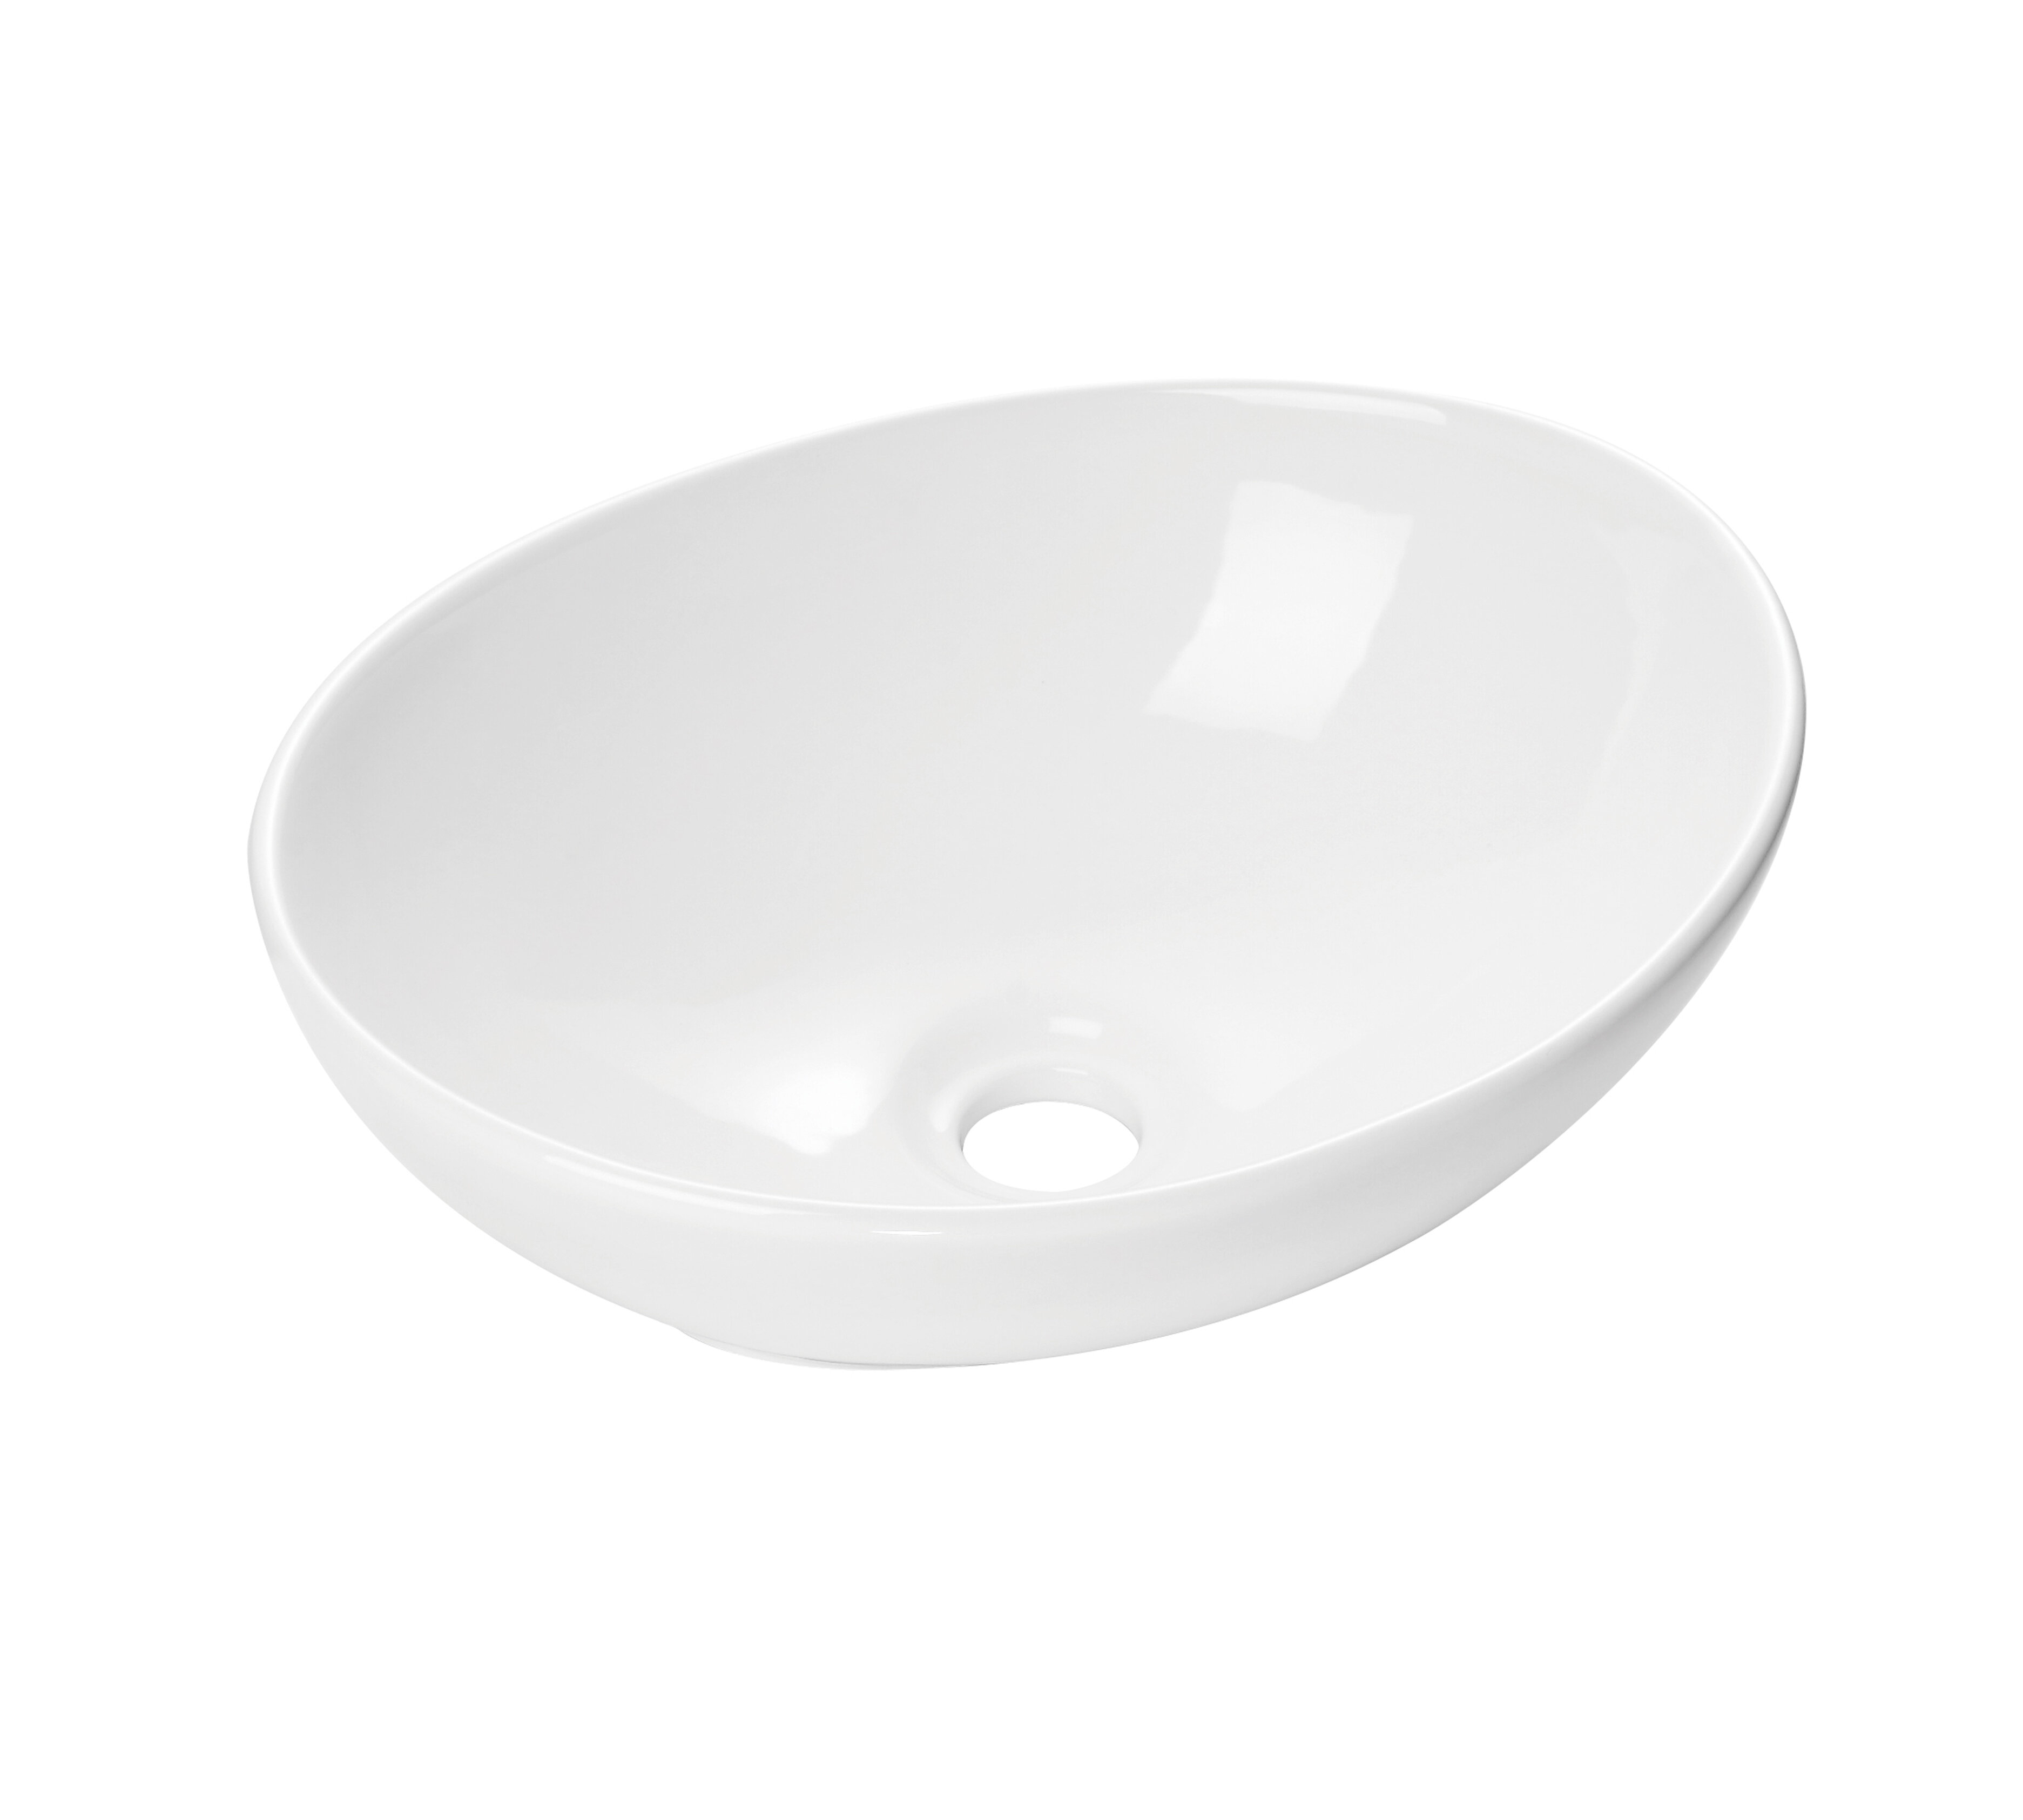 Dyconn Faucet 13.2'' Glossy White Ceramic Oval Vessel Bathroom Sink ...